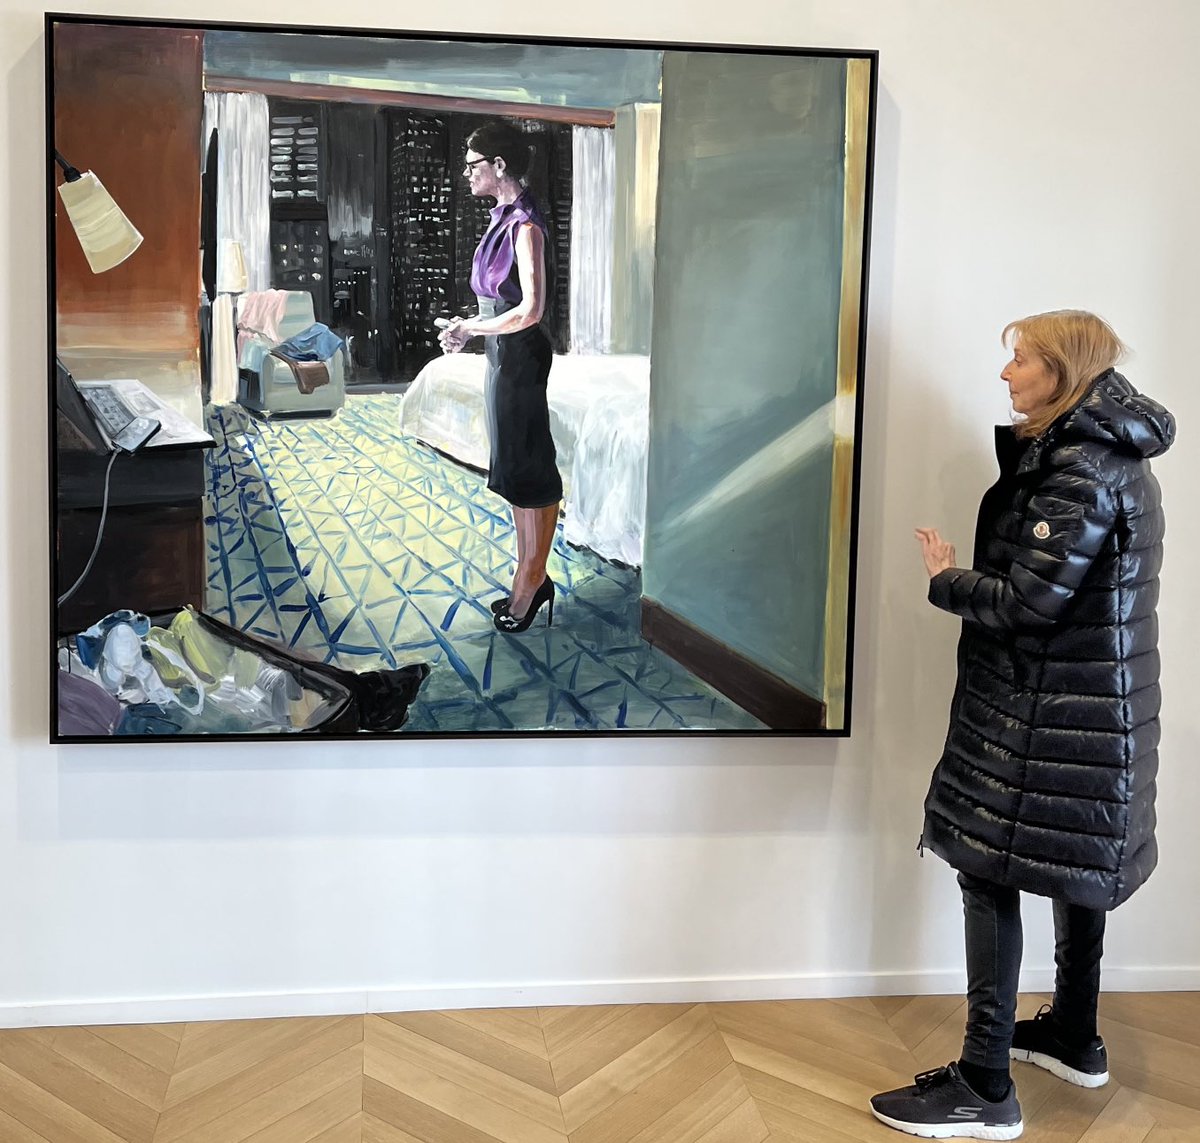 In Eric Fischl’s timely “October 7: Heading Out,” a woman stands stiffly in a hotel room, taking in the day’s tragic news. I admire Fischl’s narrative sweep, Hopperesque shadows and lushly geometric carpet. At @Skarstedt.